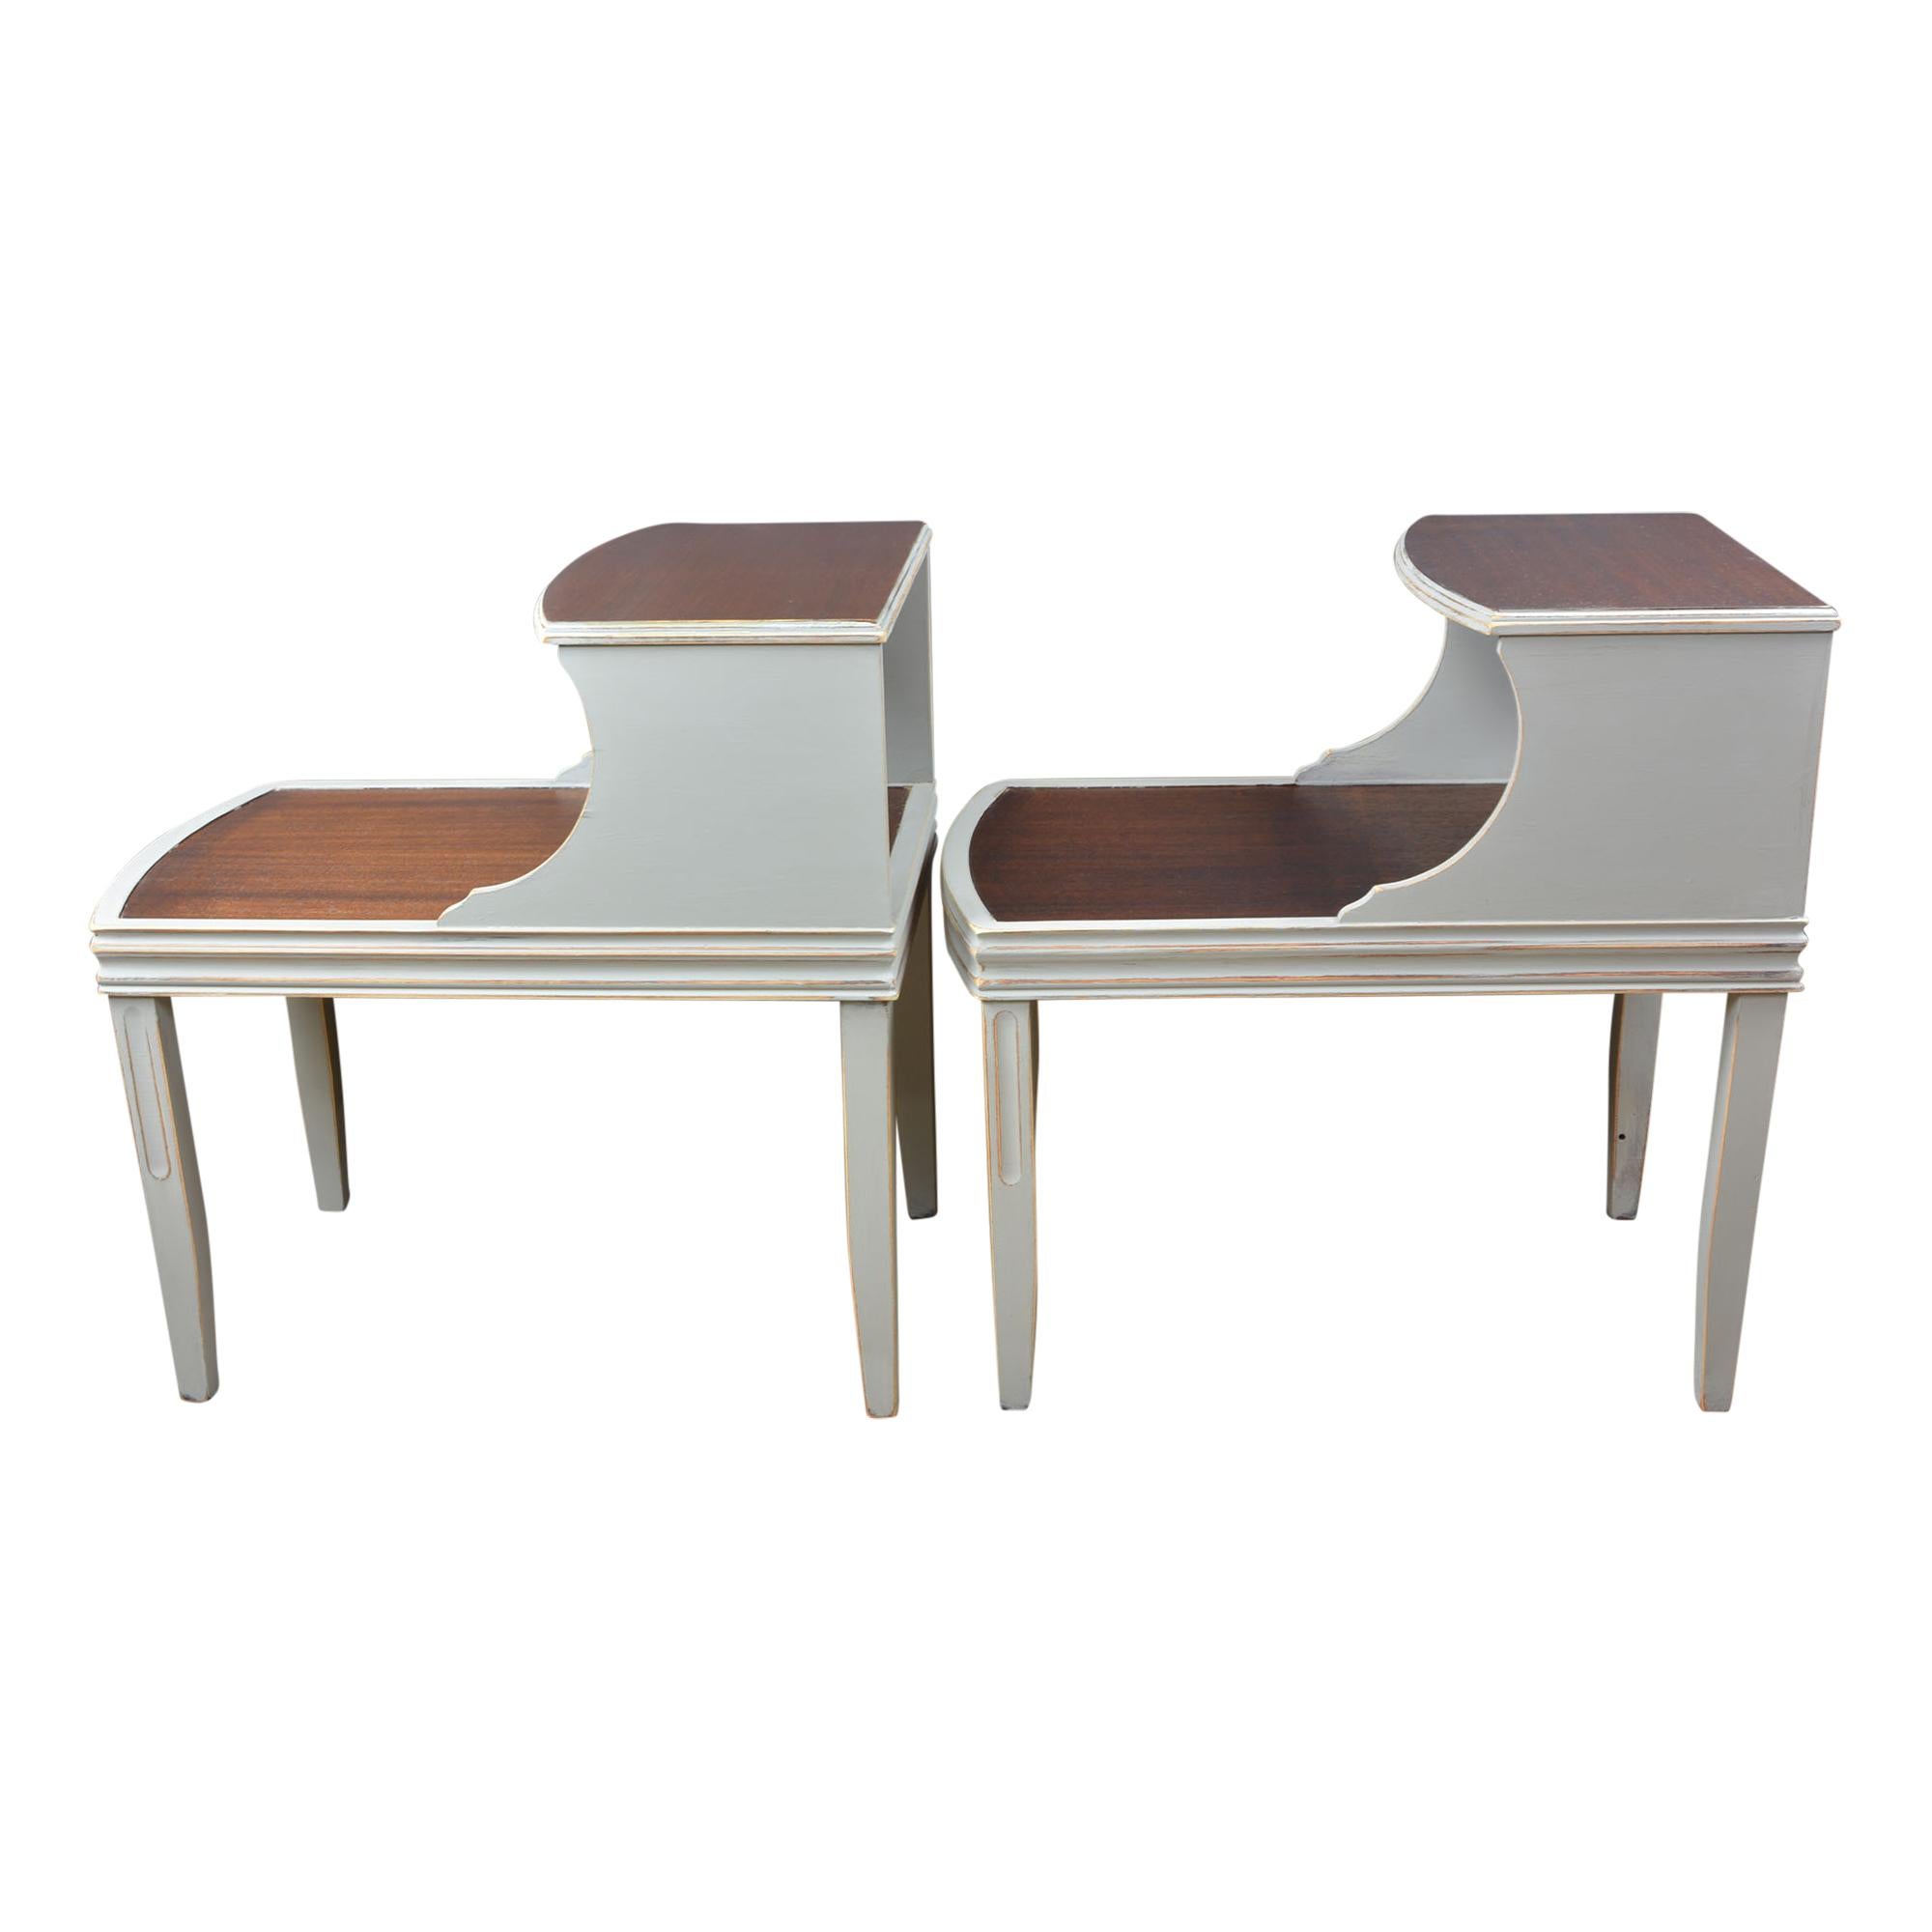 Hand-Painted Mid-Century Modern End Tables Gray and Deep Brown, Pair